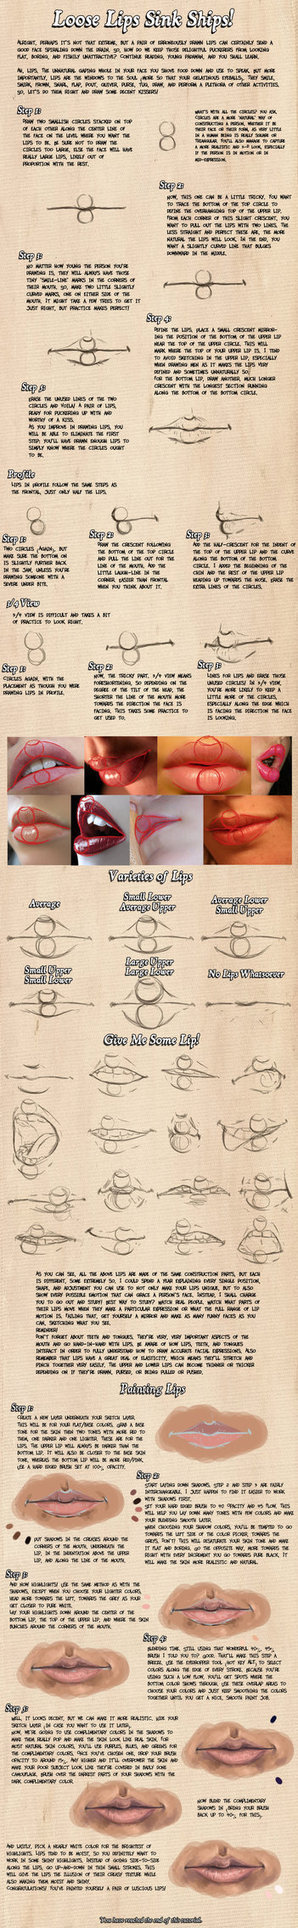 Everything Concerning Lips | Drawing References and Resources | Scoop.it